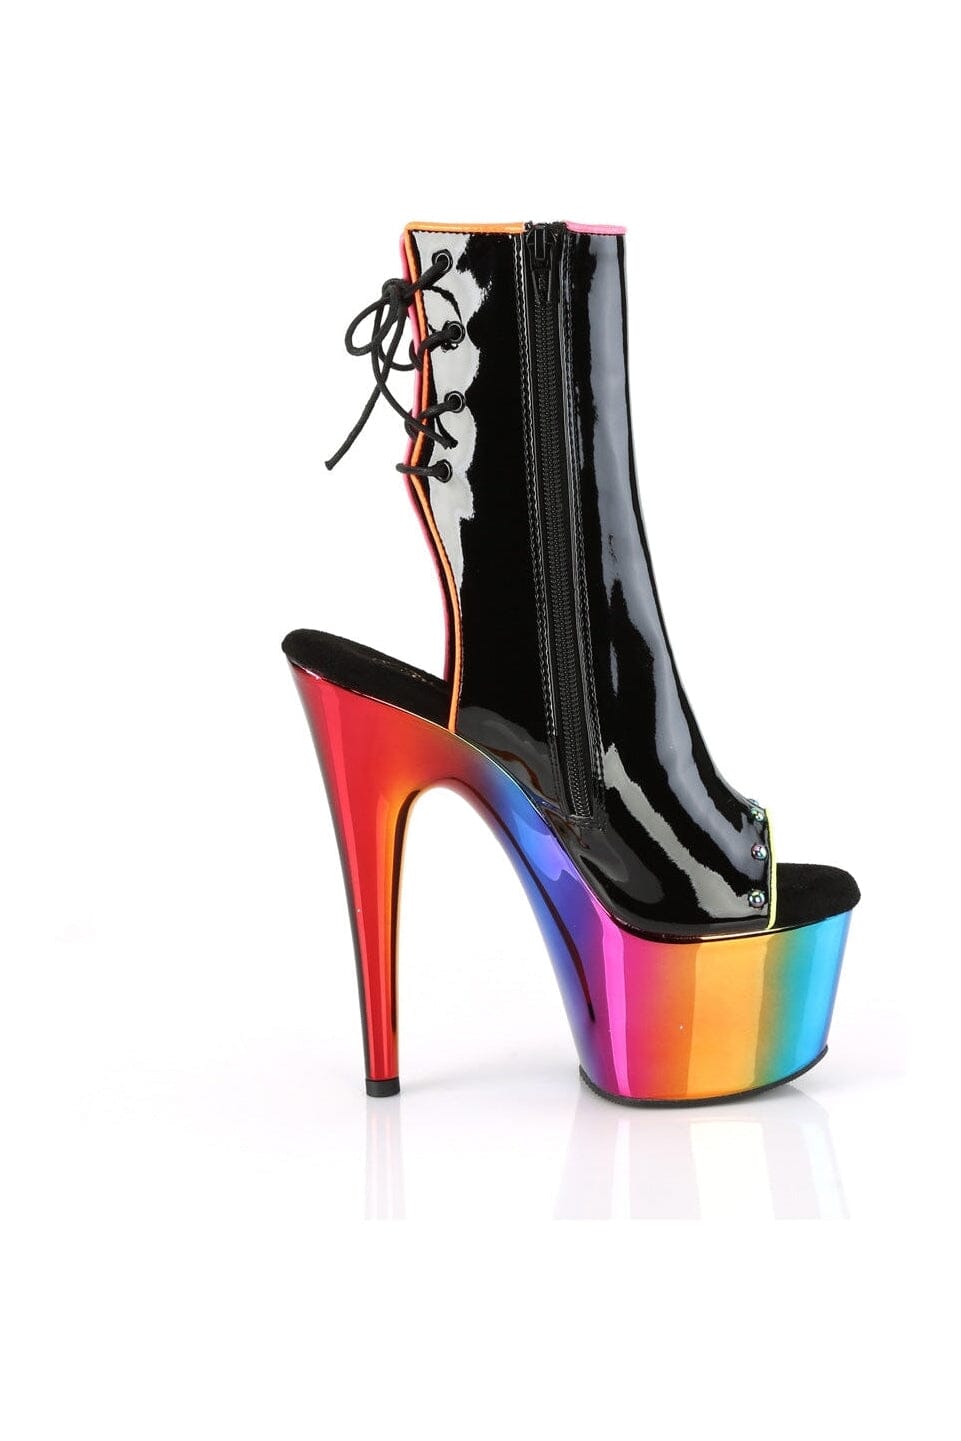 ADORE-1018RC-02 Black Patent Ankle Boot-Ankle Boots-Pleaser-SEXYSHOES.COM